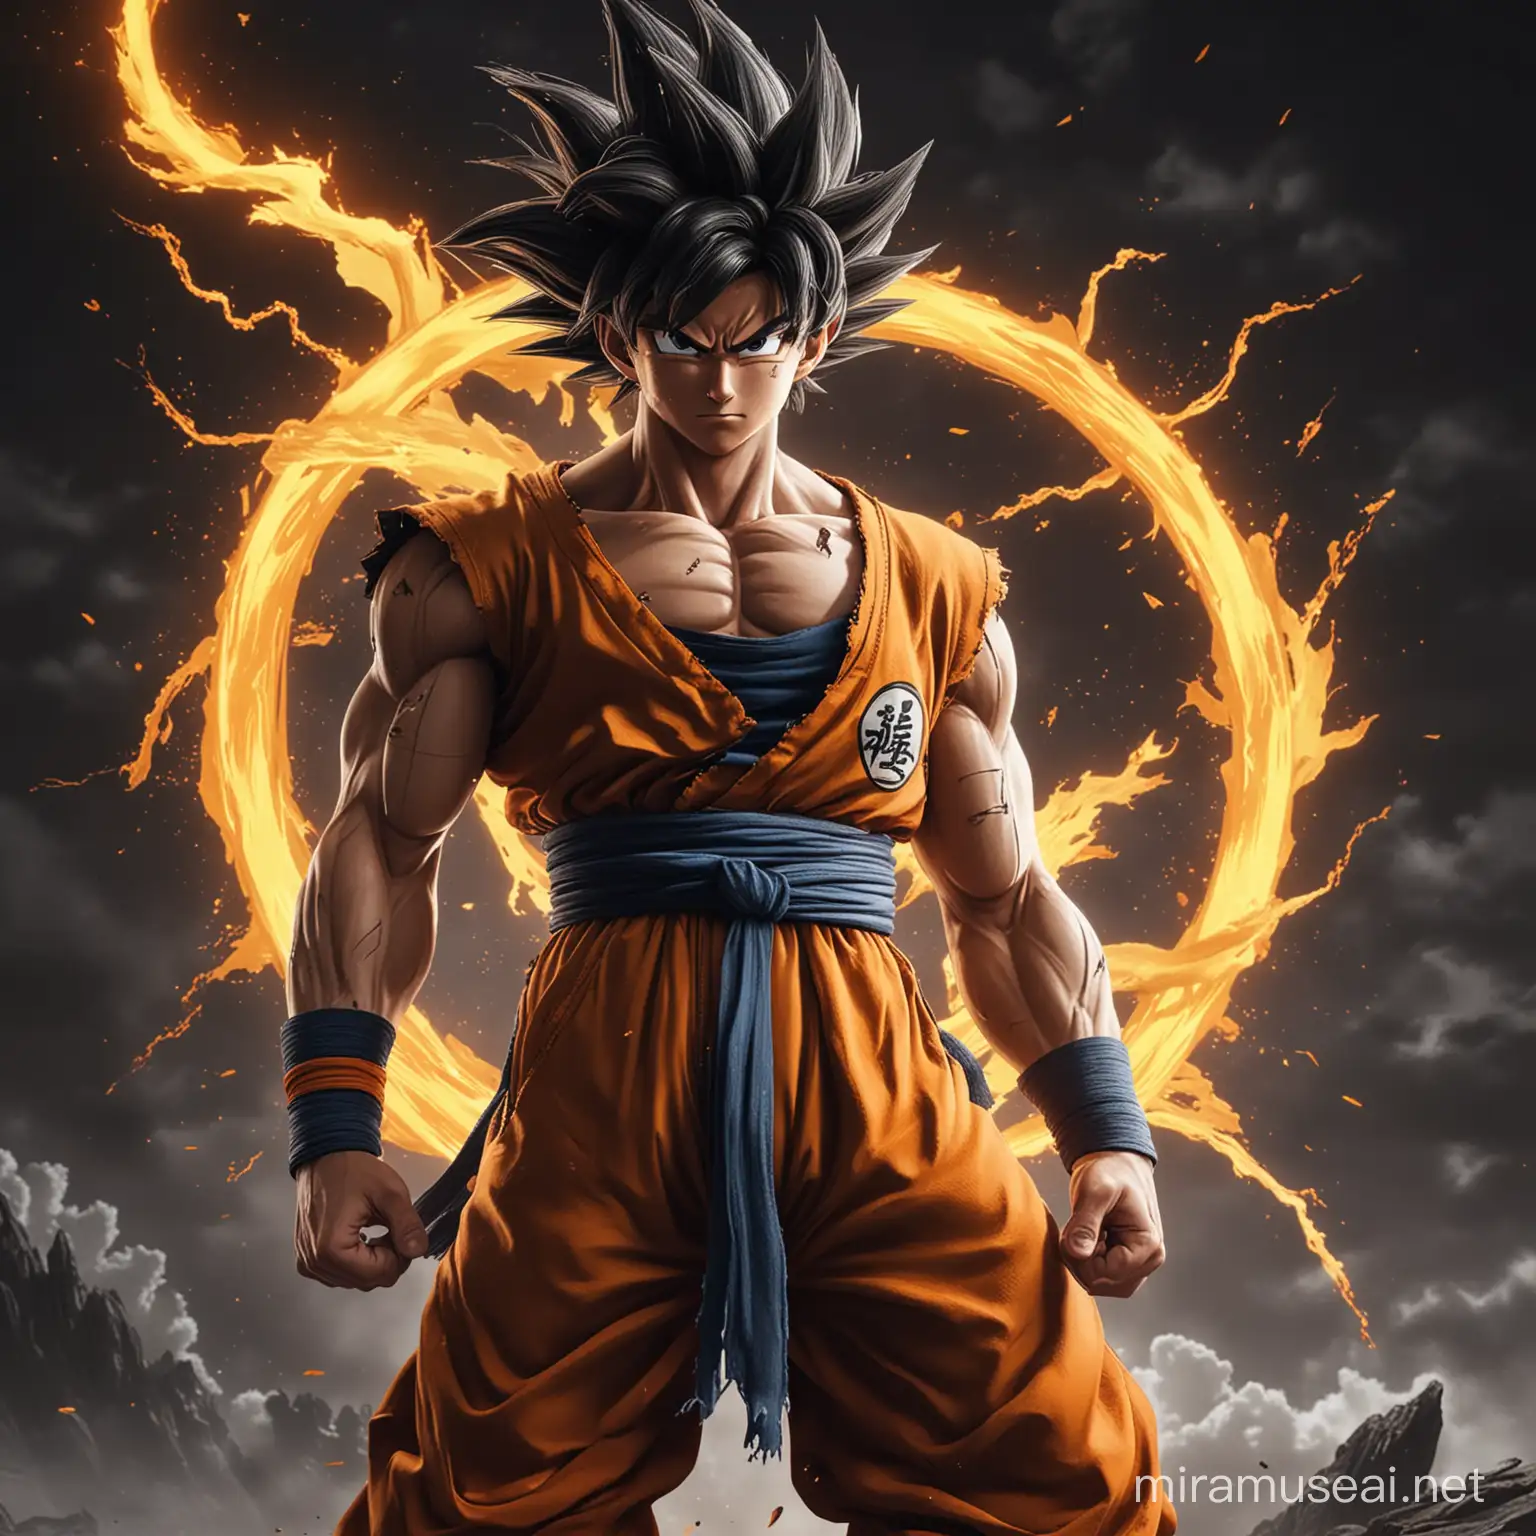 Son Goku Stands Victorious with Dragon Nova Shinron Epic Battle Scene in 4K Detail